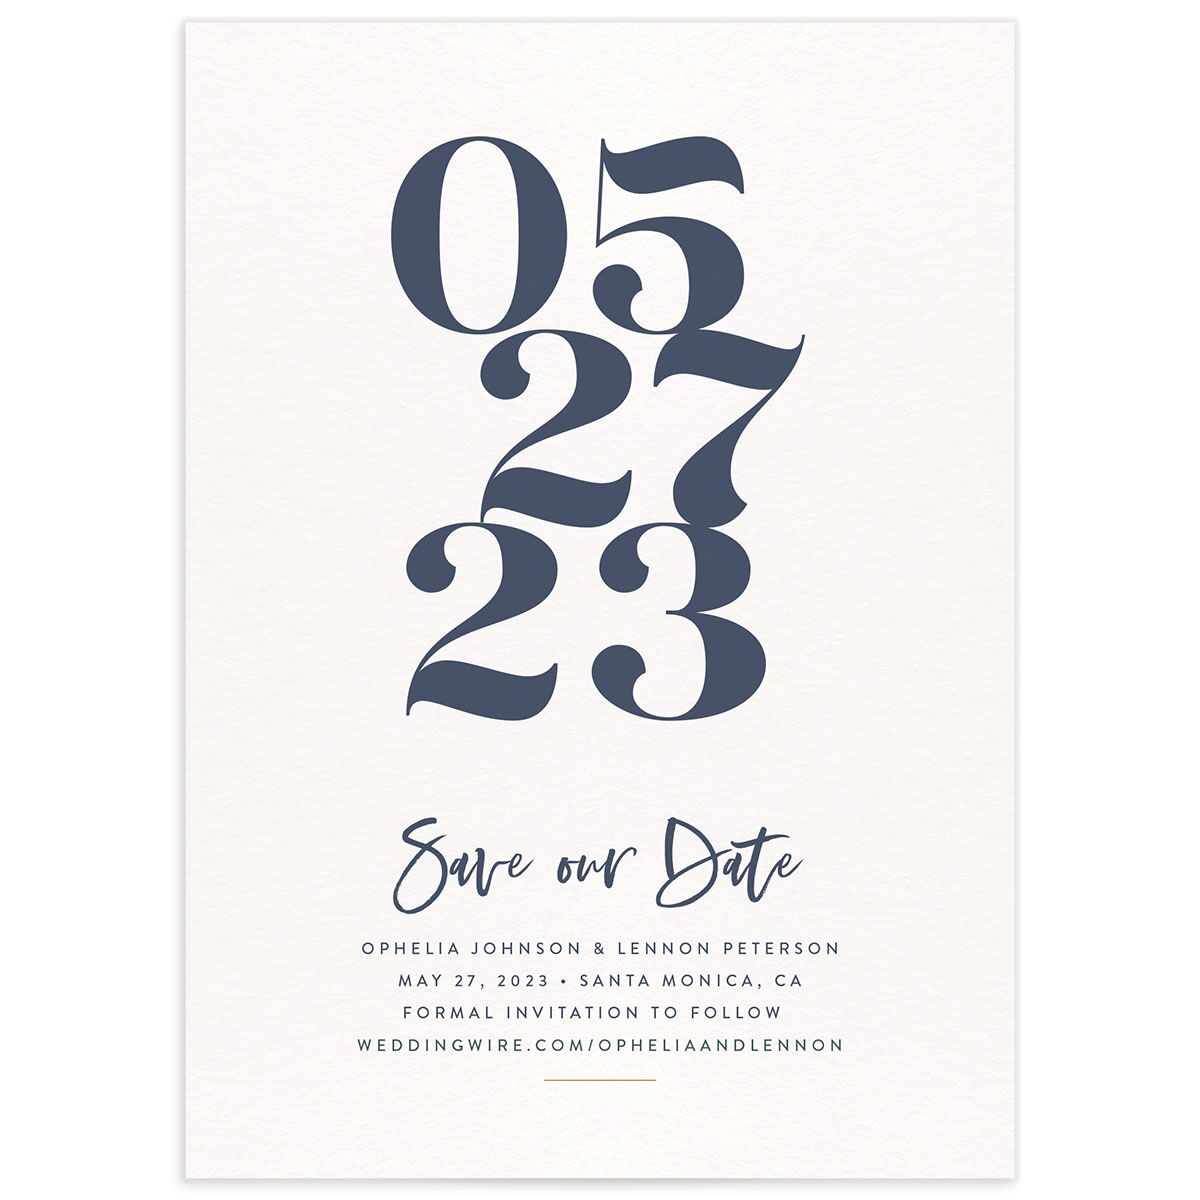 Opulent Marble Save the Date Cards